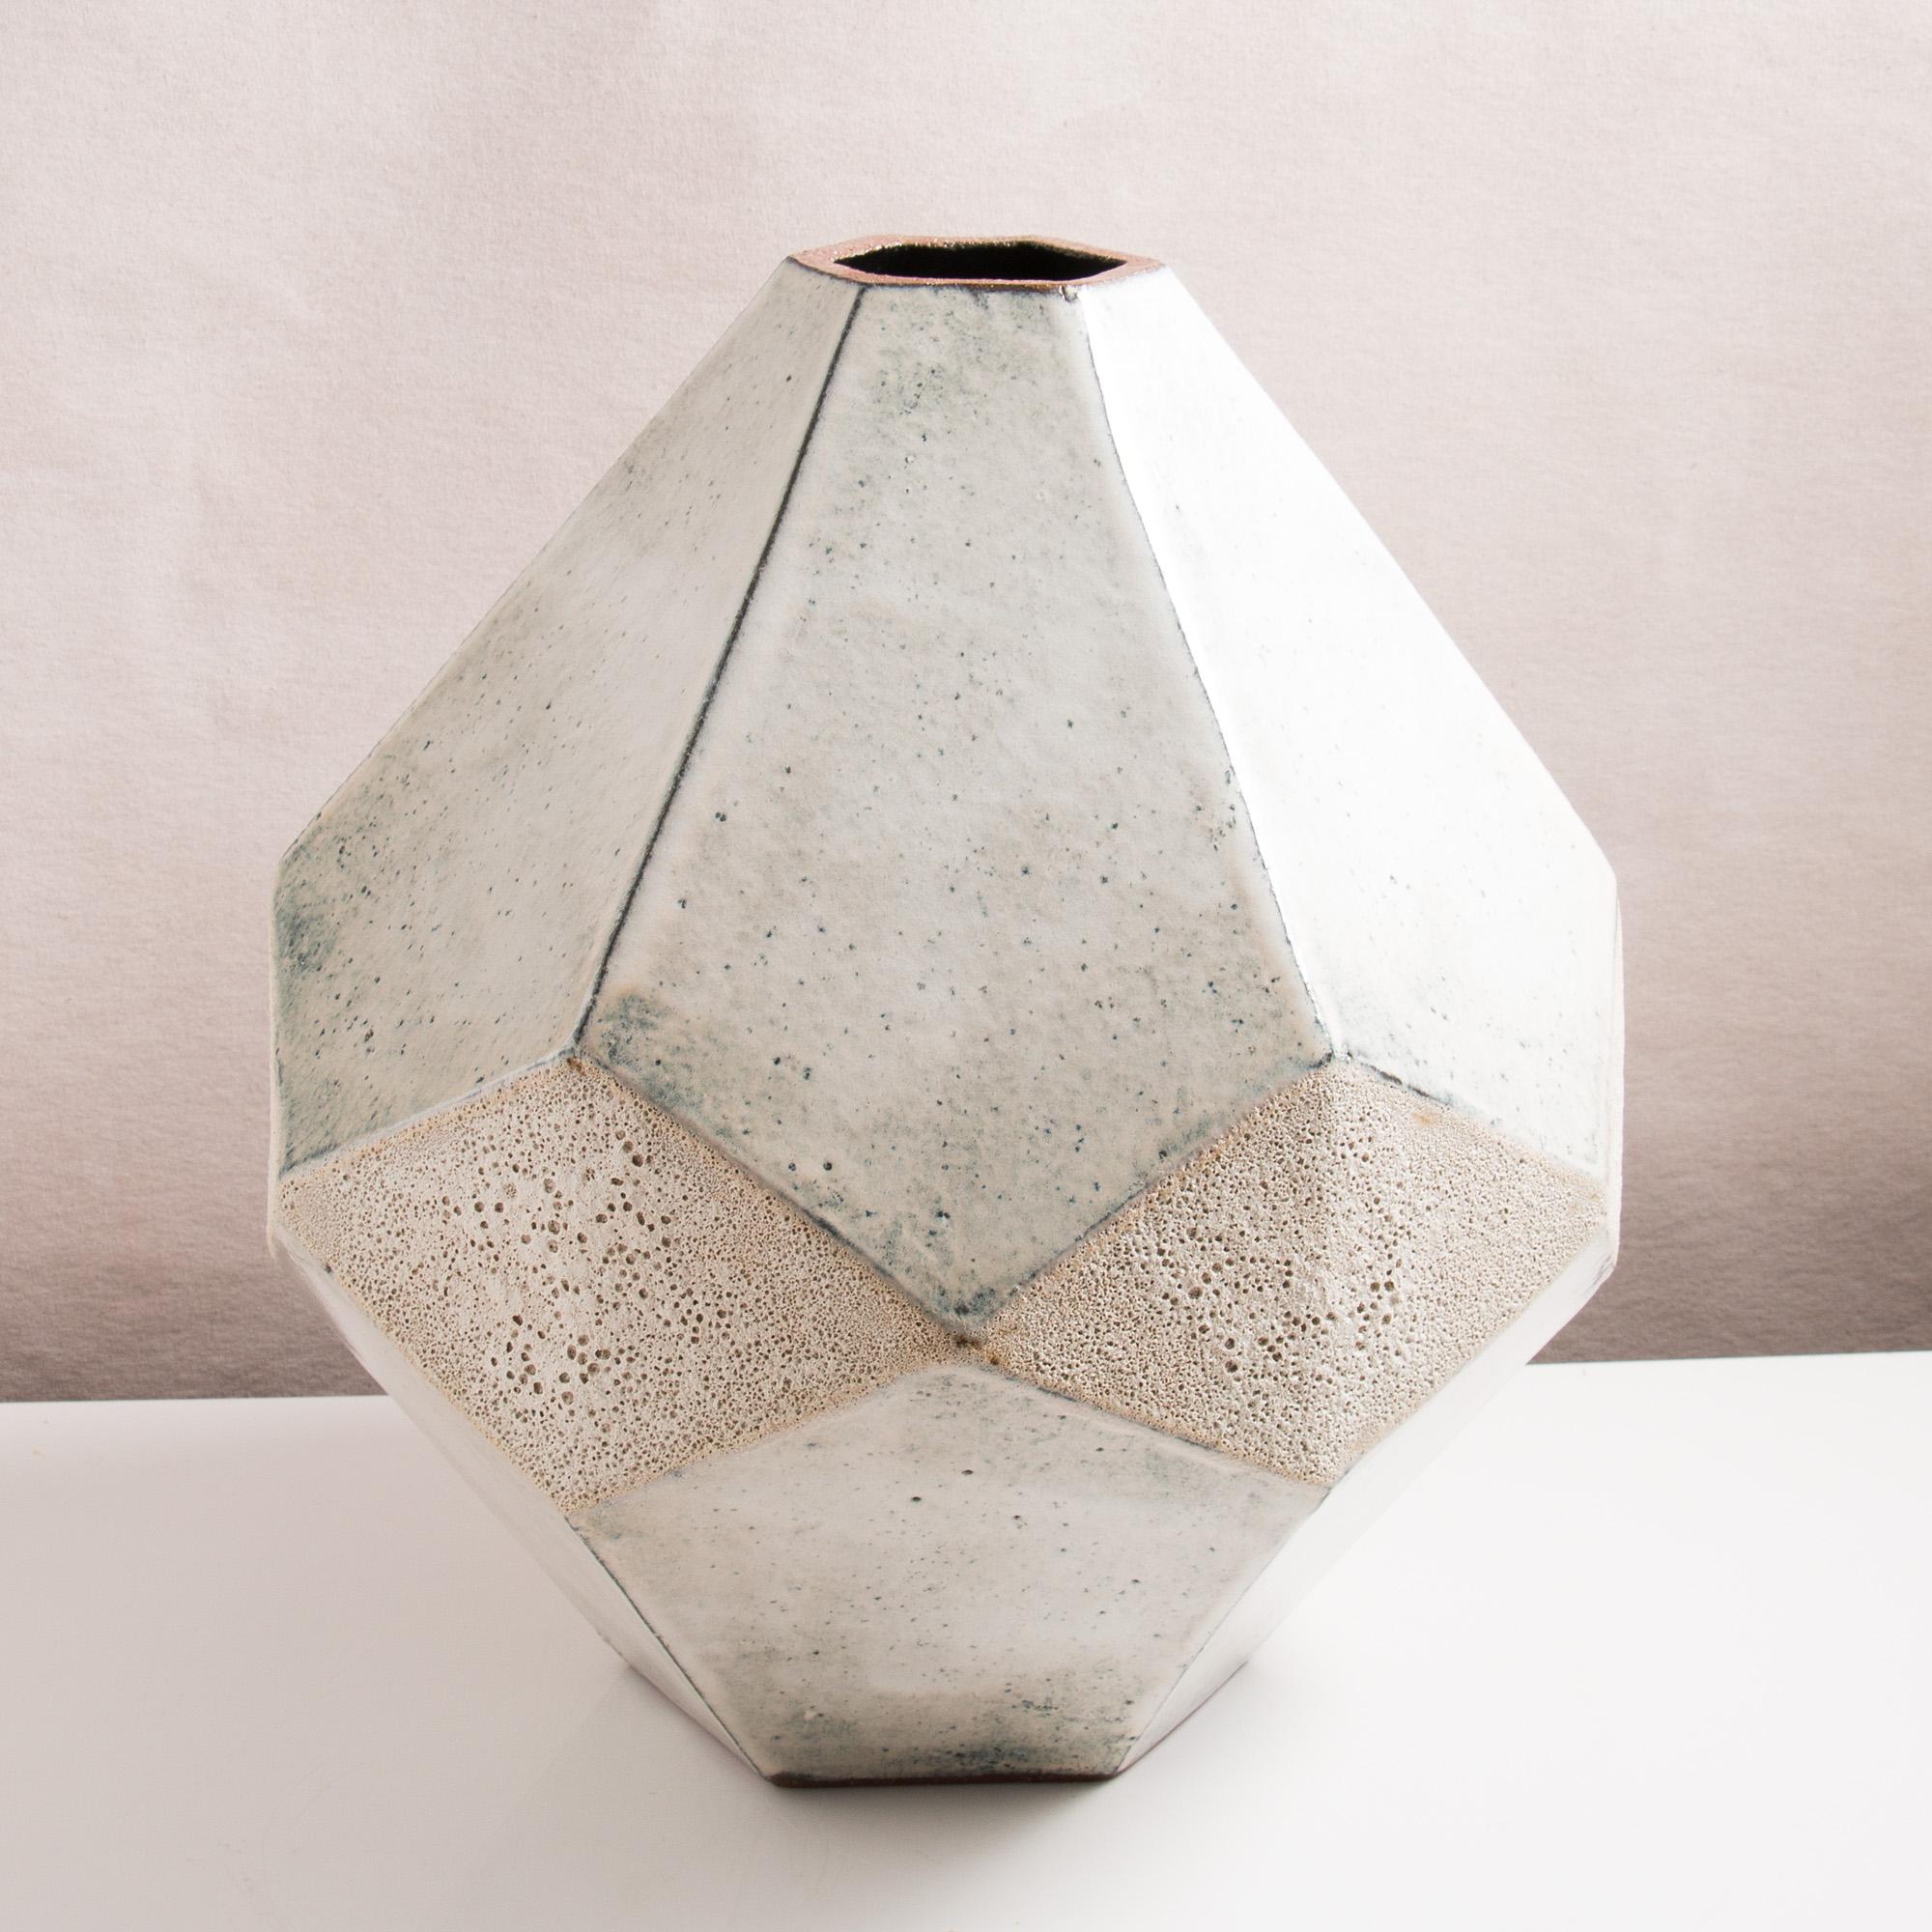 This large one-of-a-kind ceramic vase combines clean geometric lines with the warmth and individuality inherent in handmade work. It was assembled from flat sheets of a rich red-brown stoneware, into a complex geometric shape that feels both natural